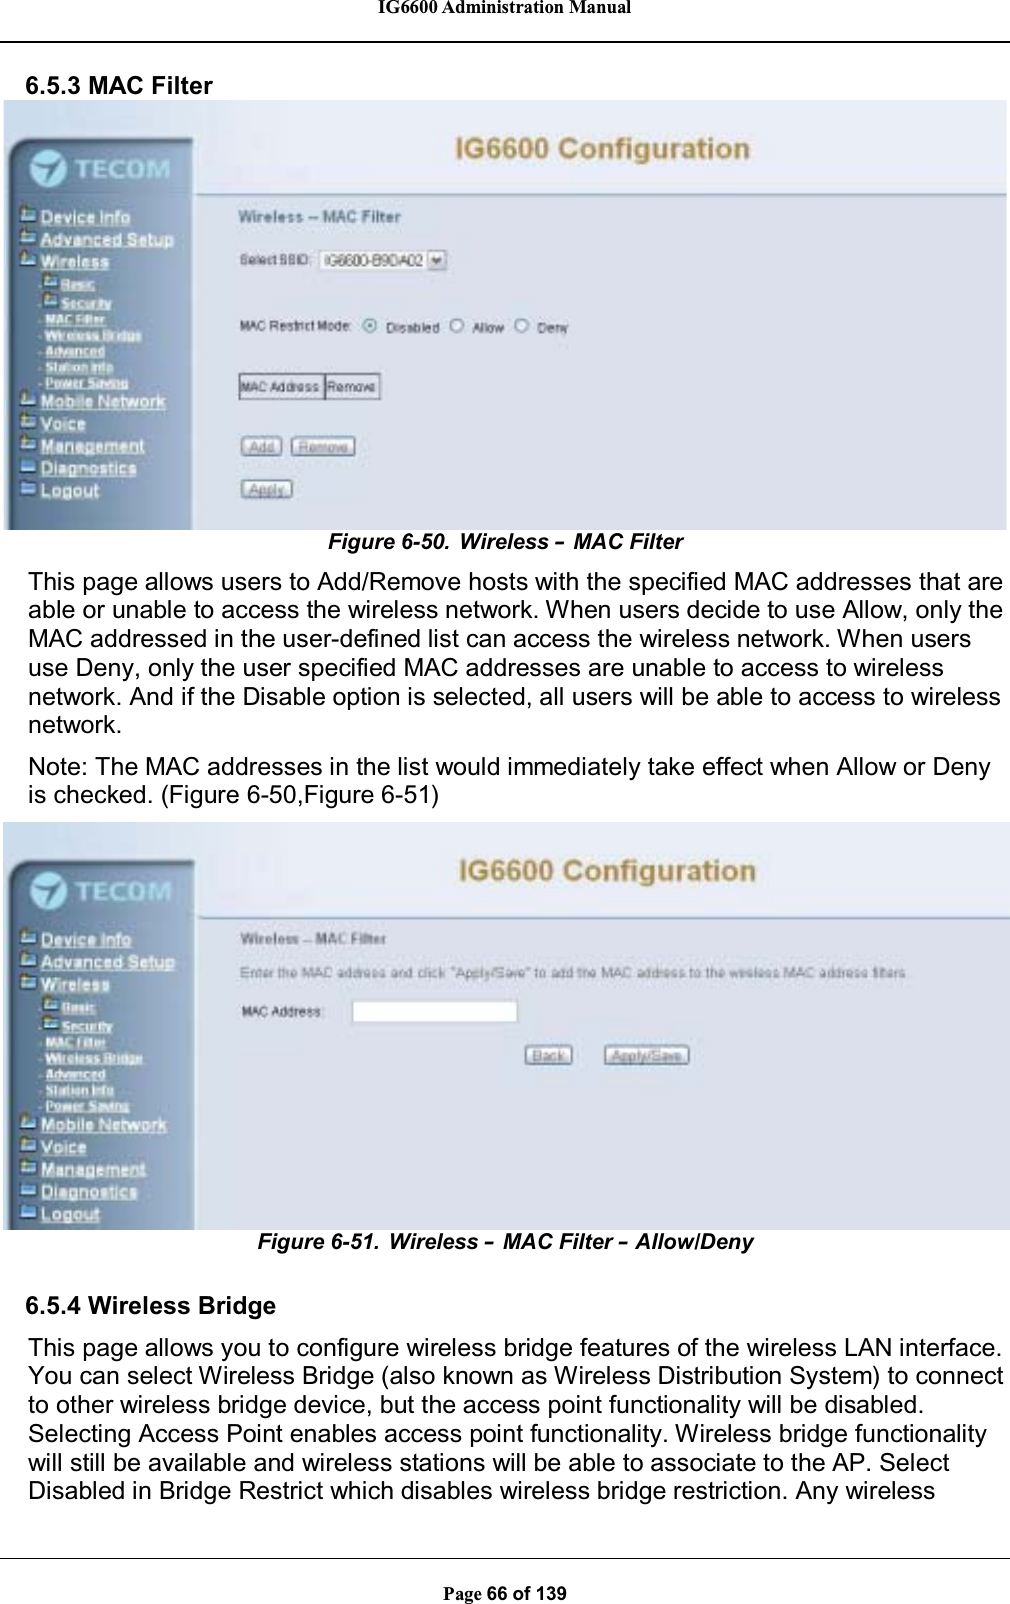 IG6600 Administration ManualPage 66 of 1396.5.3 MAC FilterFigure 6-50. Wireless –MAC FilterThis page allows users to Add/Remove hosts with the specified MAC addresses that areable or unable to access the wireless network. When users decide to use Allow, only theMAC addressed in the user-defined list can access the wireless network. When usersuse Deny, only the user specified MAC addresses are unable to access to wirelessnetwork. And if the Disable option is selected, all users will be able to access to wirelessnetwork.Note: The MAC addresses in the list would immediately take effect when Allow or Denyis checked. (Figure 6-50,Figure 6-51)Figure 6-51. Wireless –MAC Filter –Allow/Deny6.5.4 Wireless BridgeThis page allows you to configure wireless bridge features of the wireless LAN interface.You can select Wireless Bridge (also known as Wireless Distribution System) to connectto other wireless bridge device, but the access point functionality will be disabled.Selecting Access Point enables access point functionality. Wireless bridge functionalitywill still be available and wireless stations will be able to associate to the AP. SelectDisabled in Bridge Restrict which disables wireless bridge restriction. Any wireless